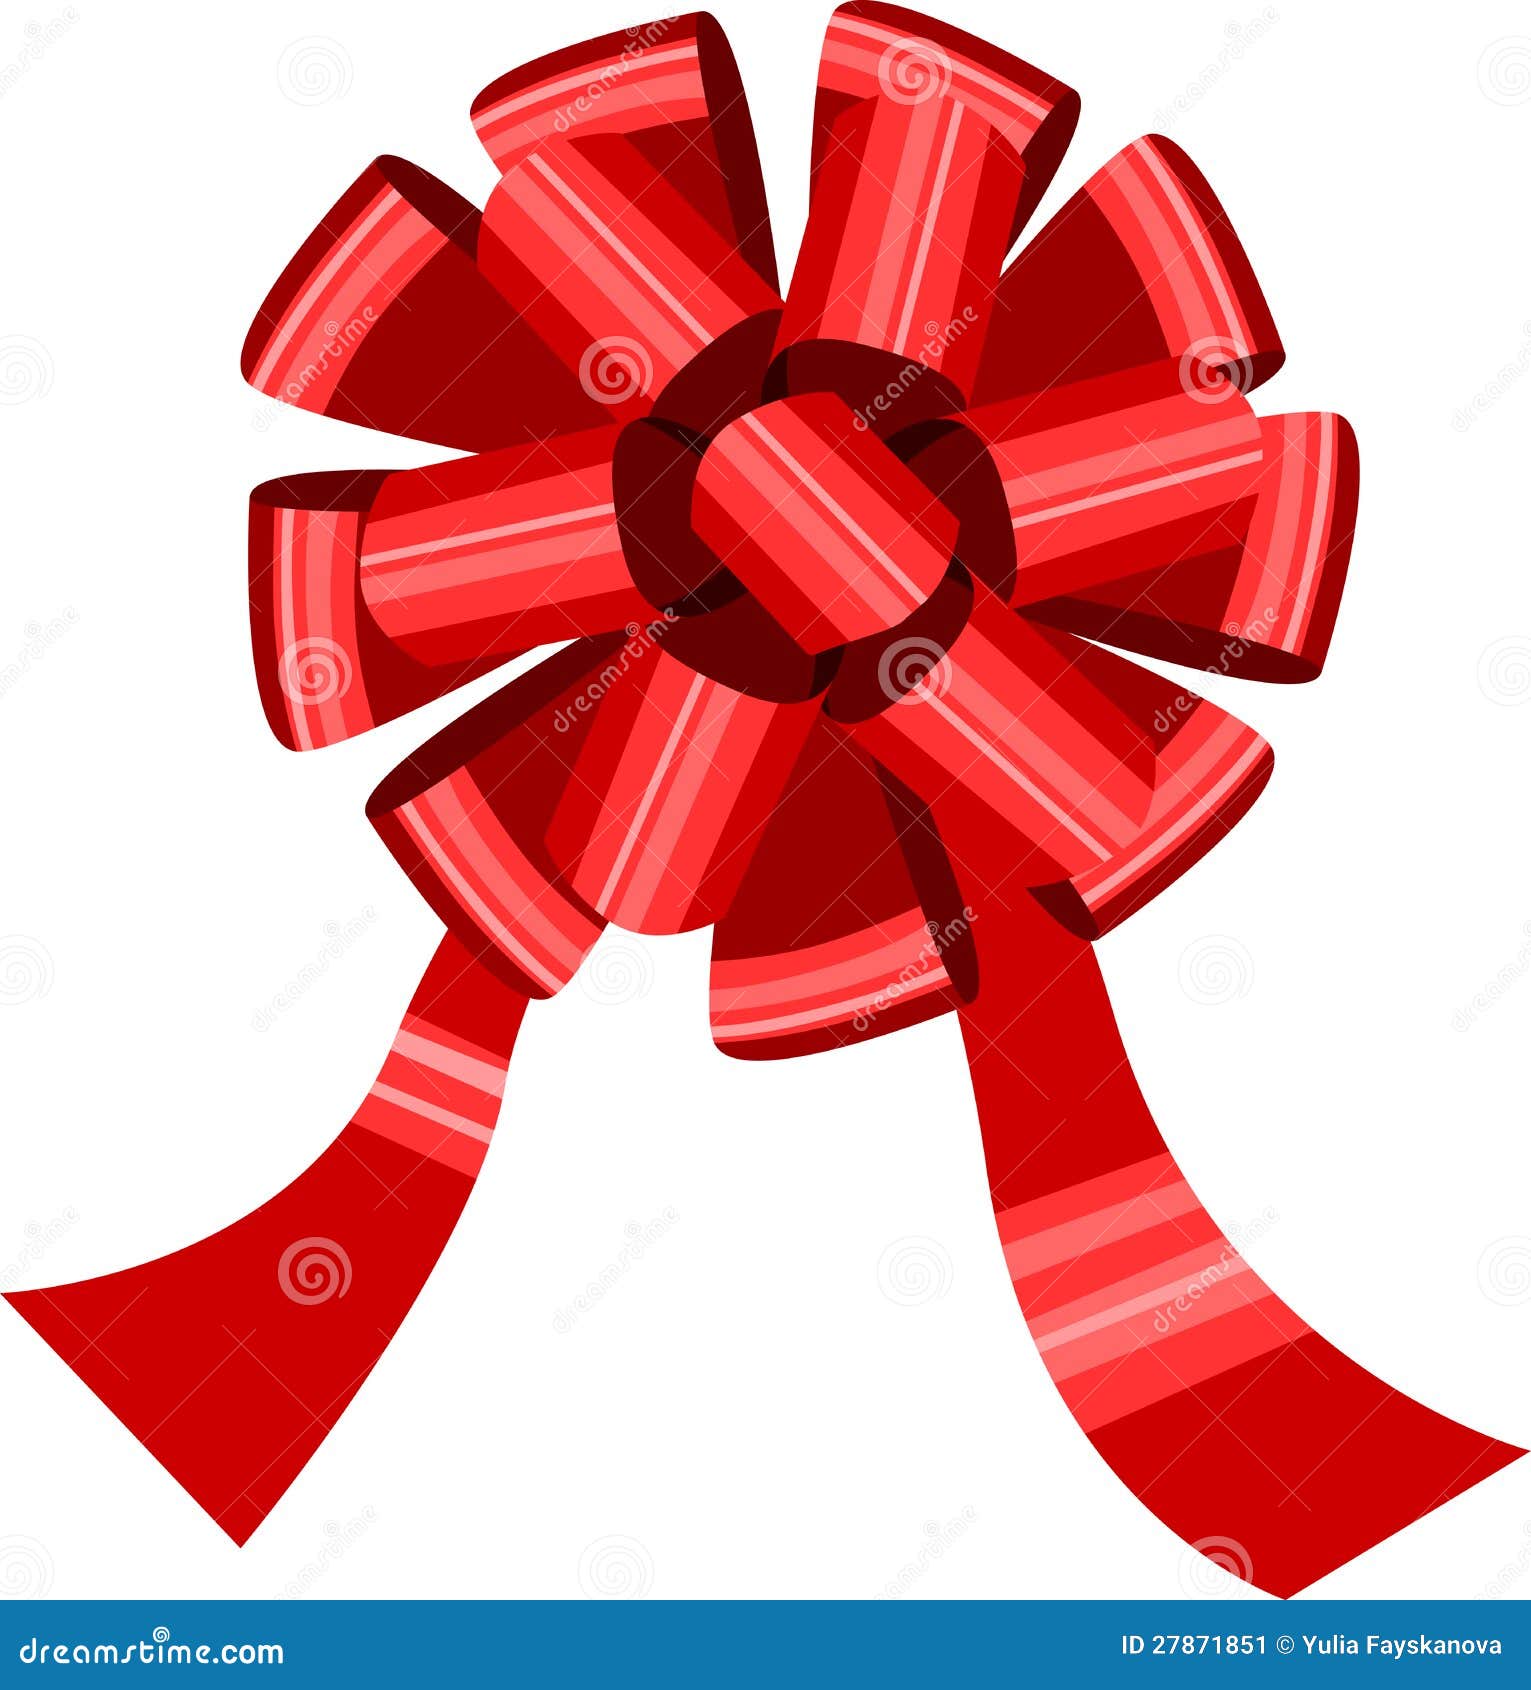 Big Red Bow Isolated On White Stock Image - Image: 27871851